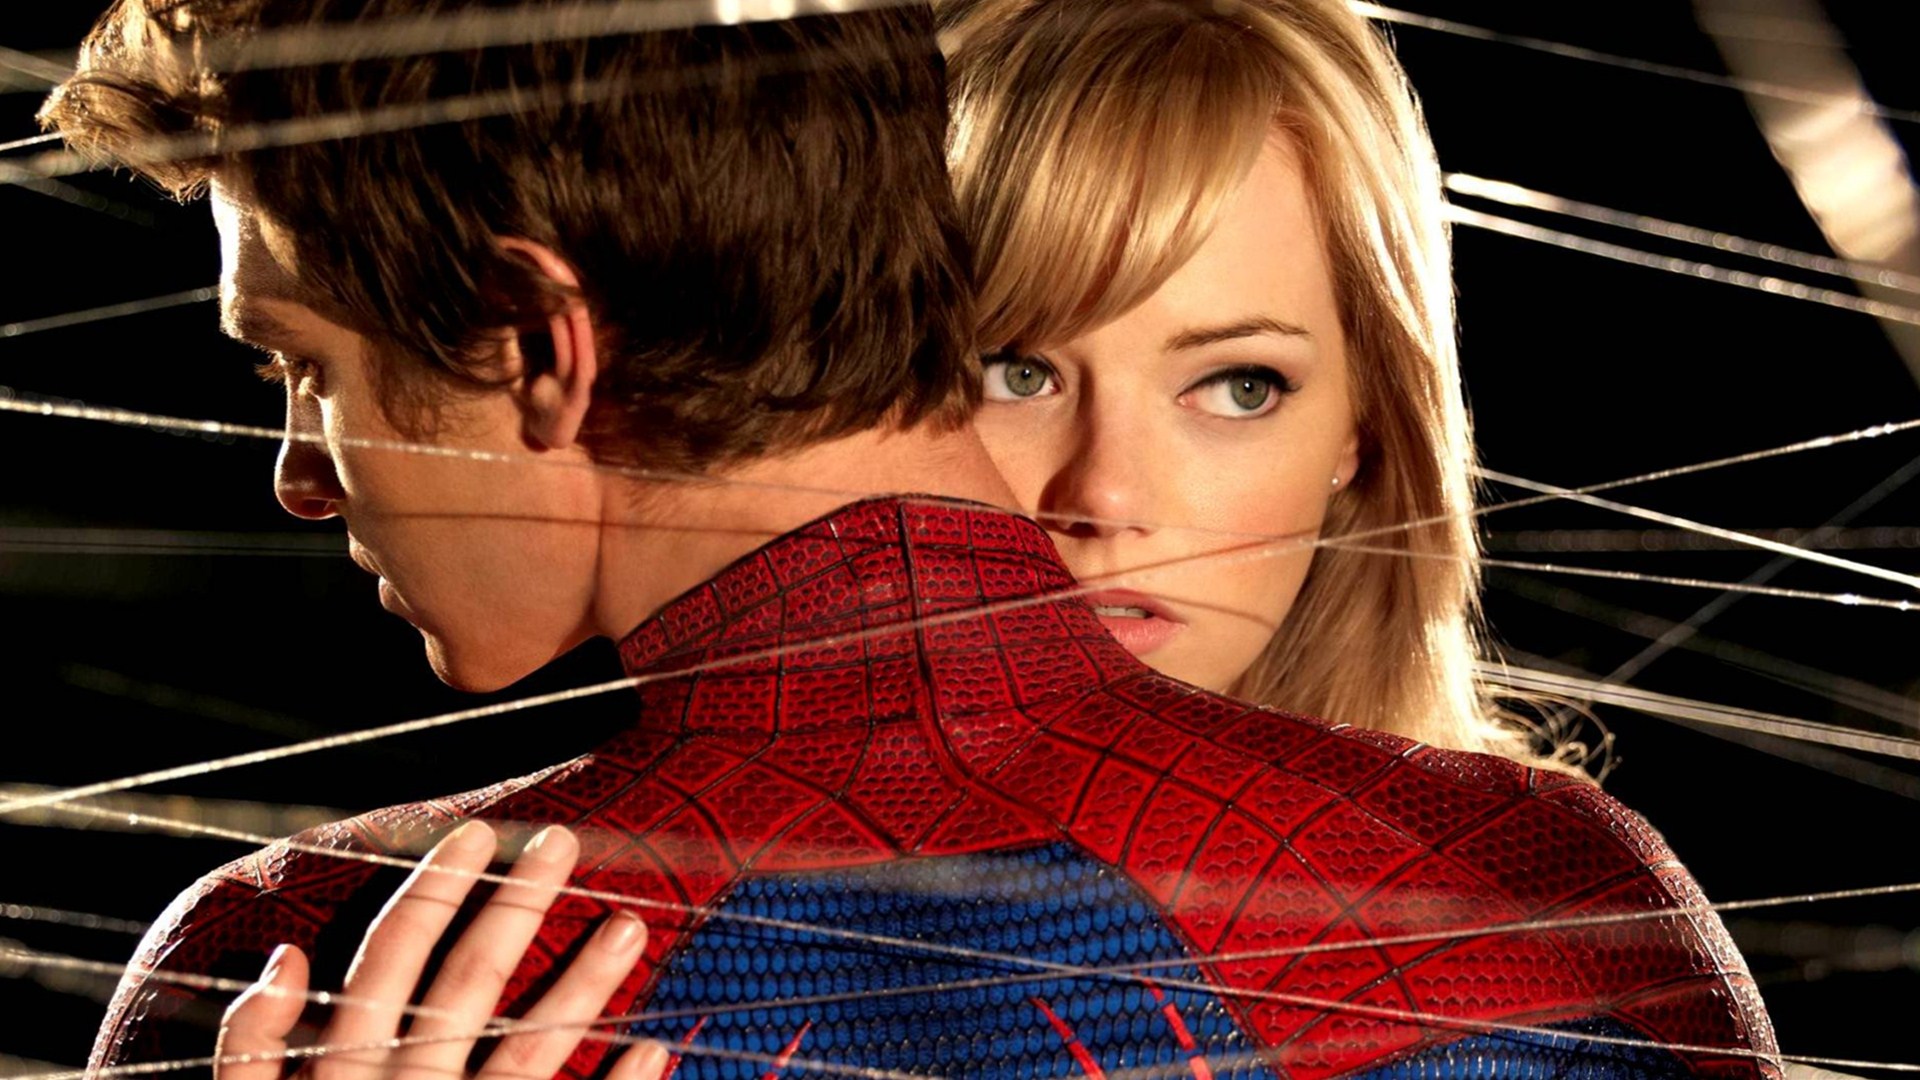 The-Amazing-Spider-Man-2-Movie-Theme-Song-5 Awesome Wallpapers To Download For Your Desktop Background